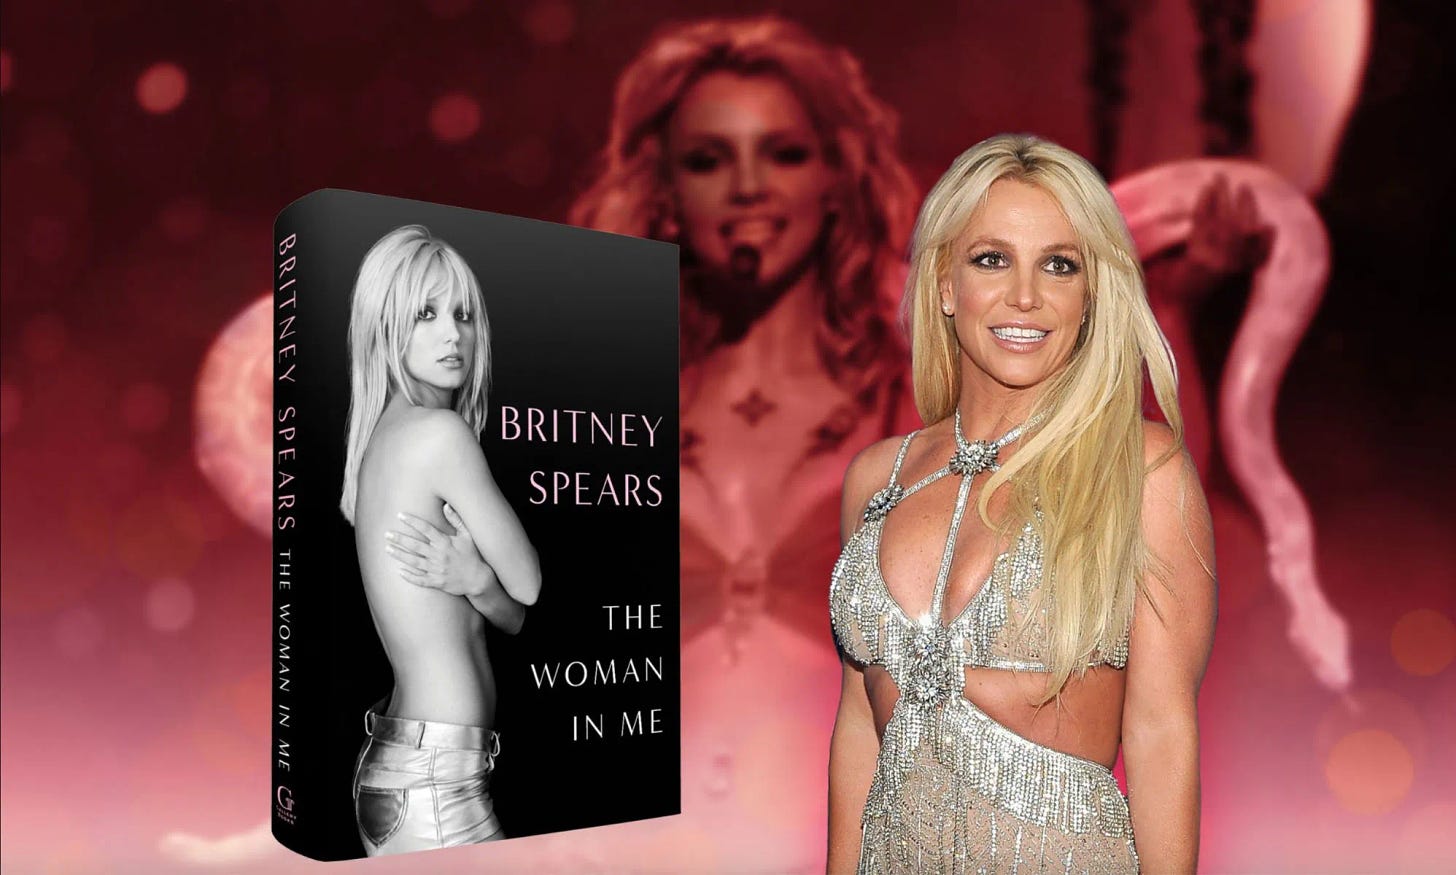 5 revelations from Britney Spears' tell-all book The Woman In Me